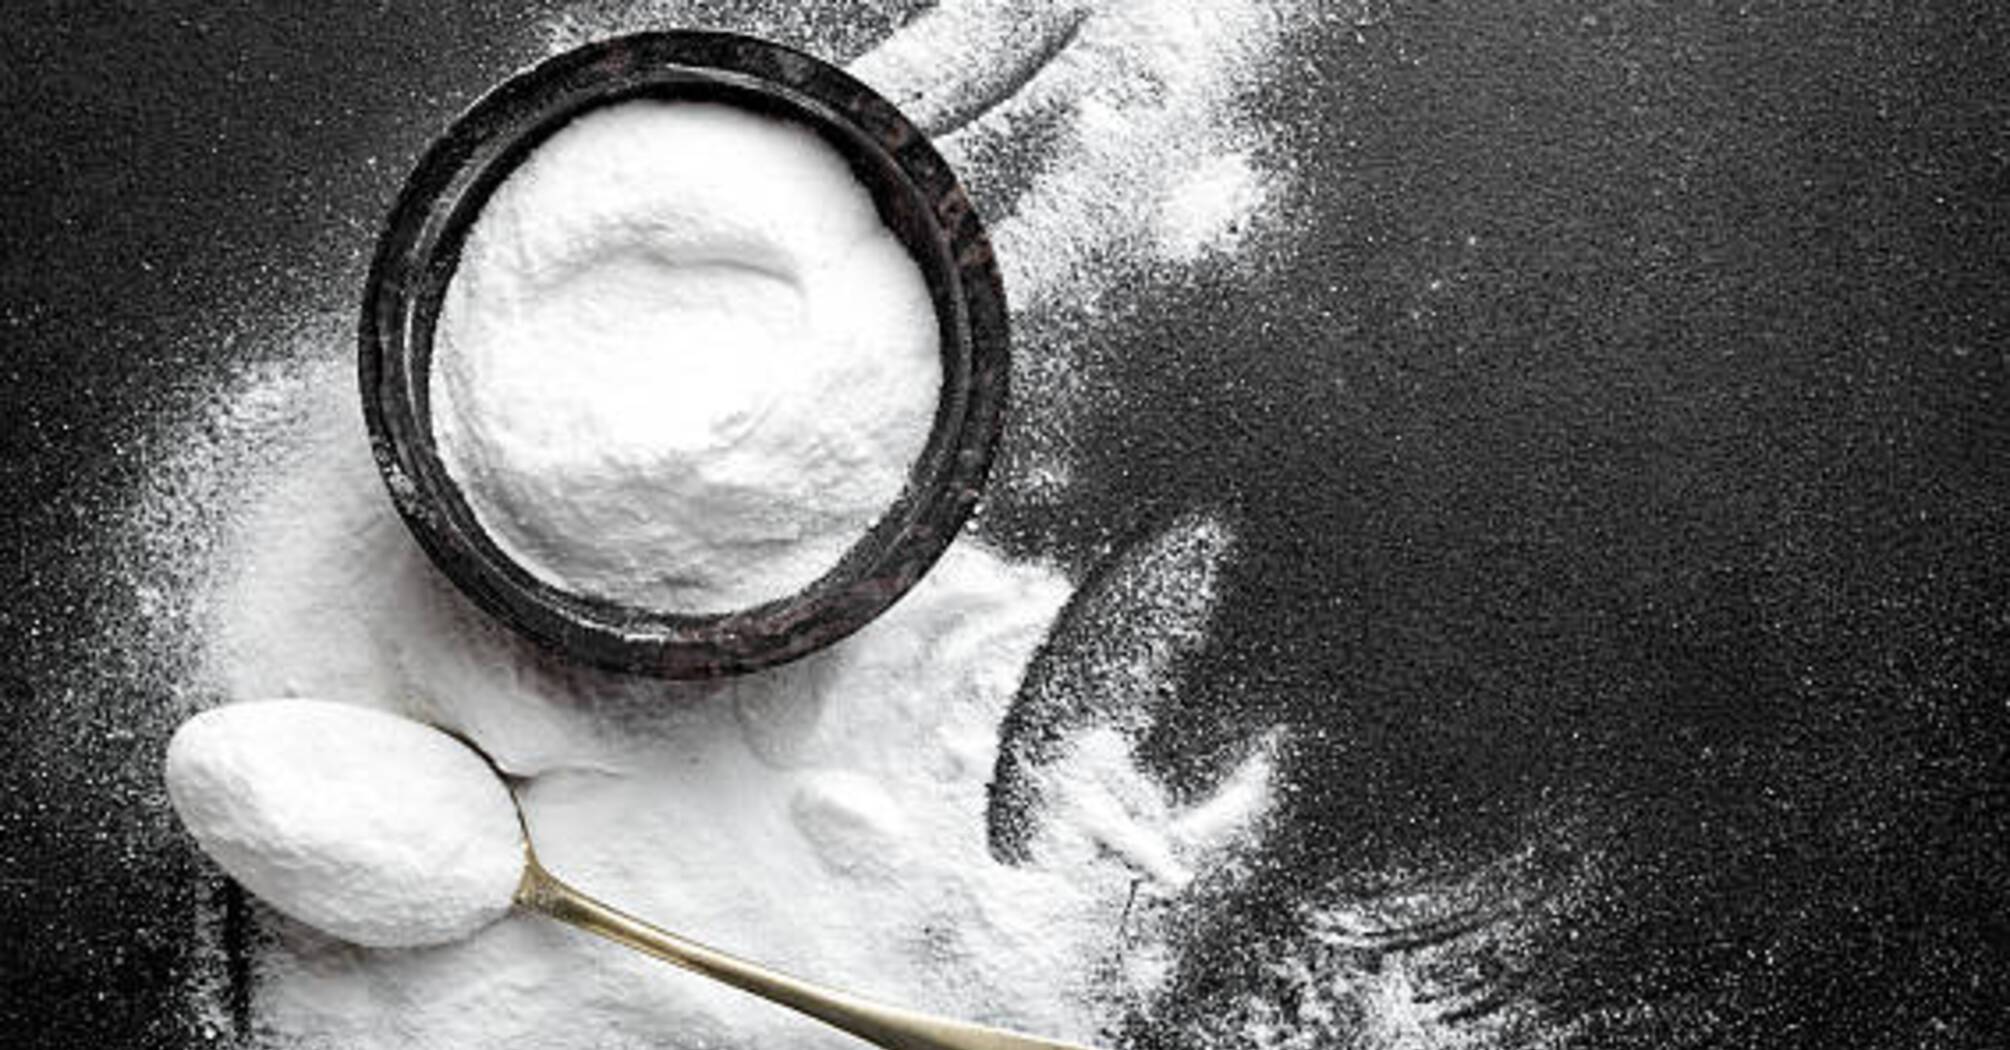 How to use baking soda in everyday life: 5 effective tips